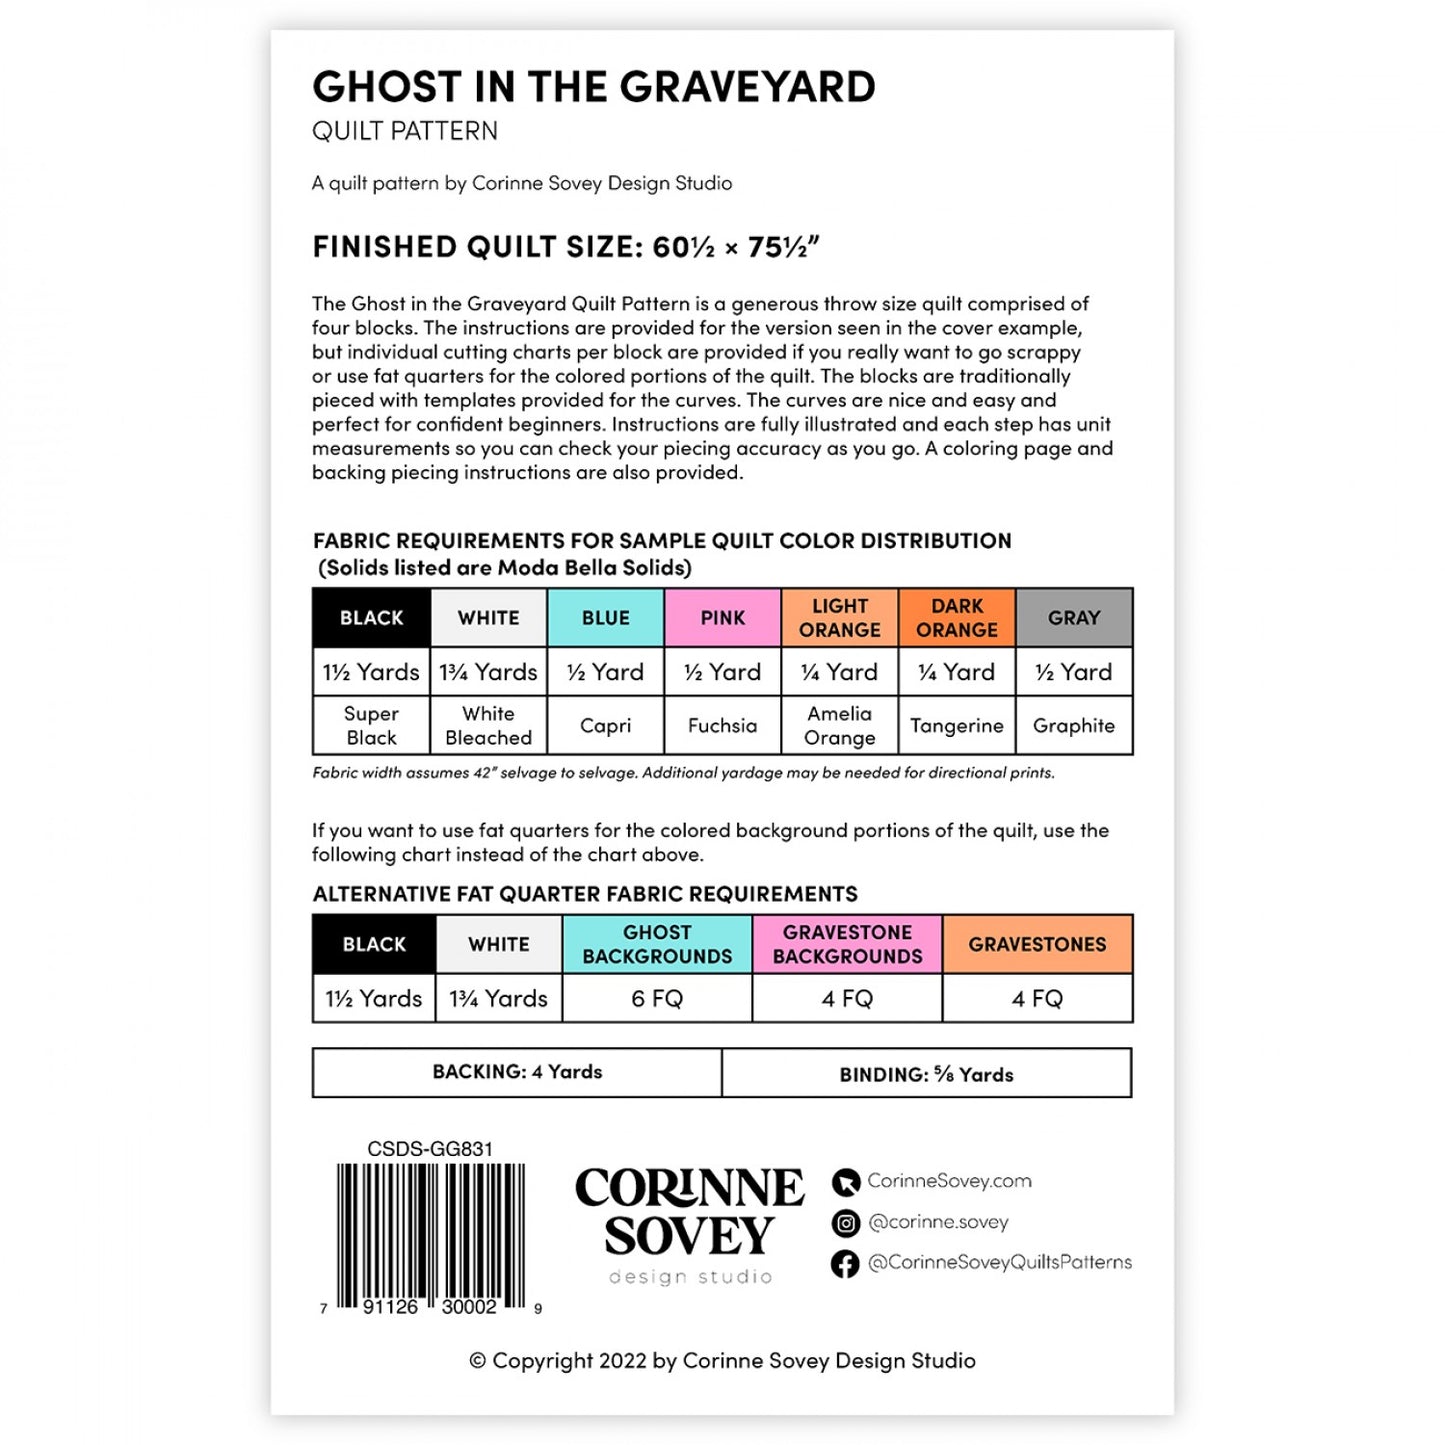 Ghost in the Graveyard | Corinne Sovey